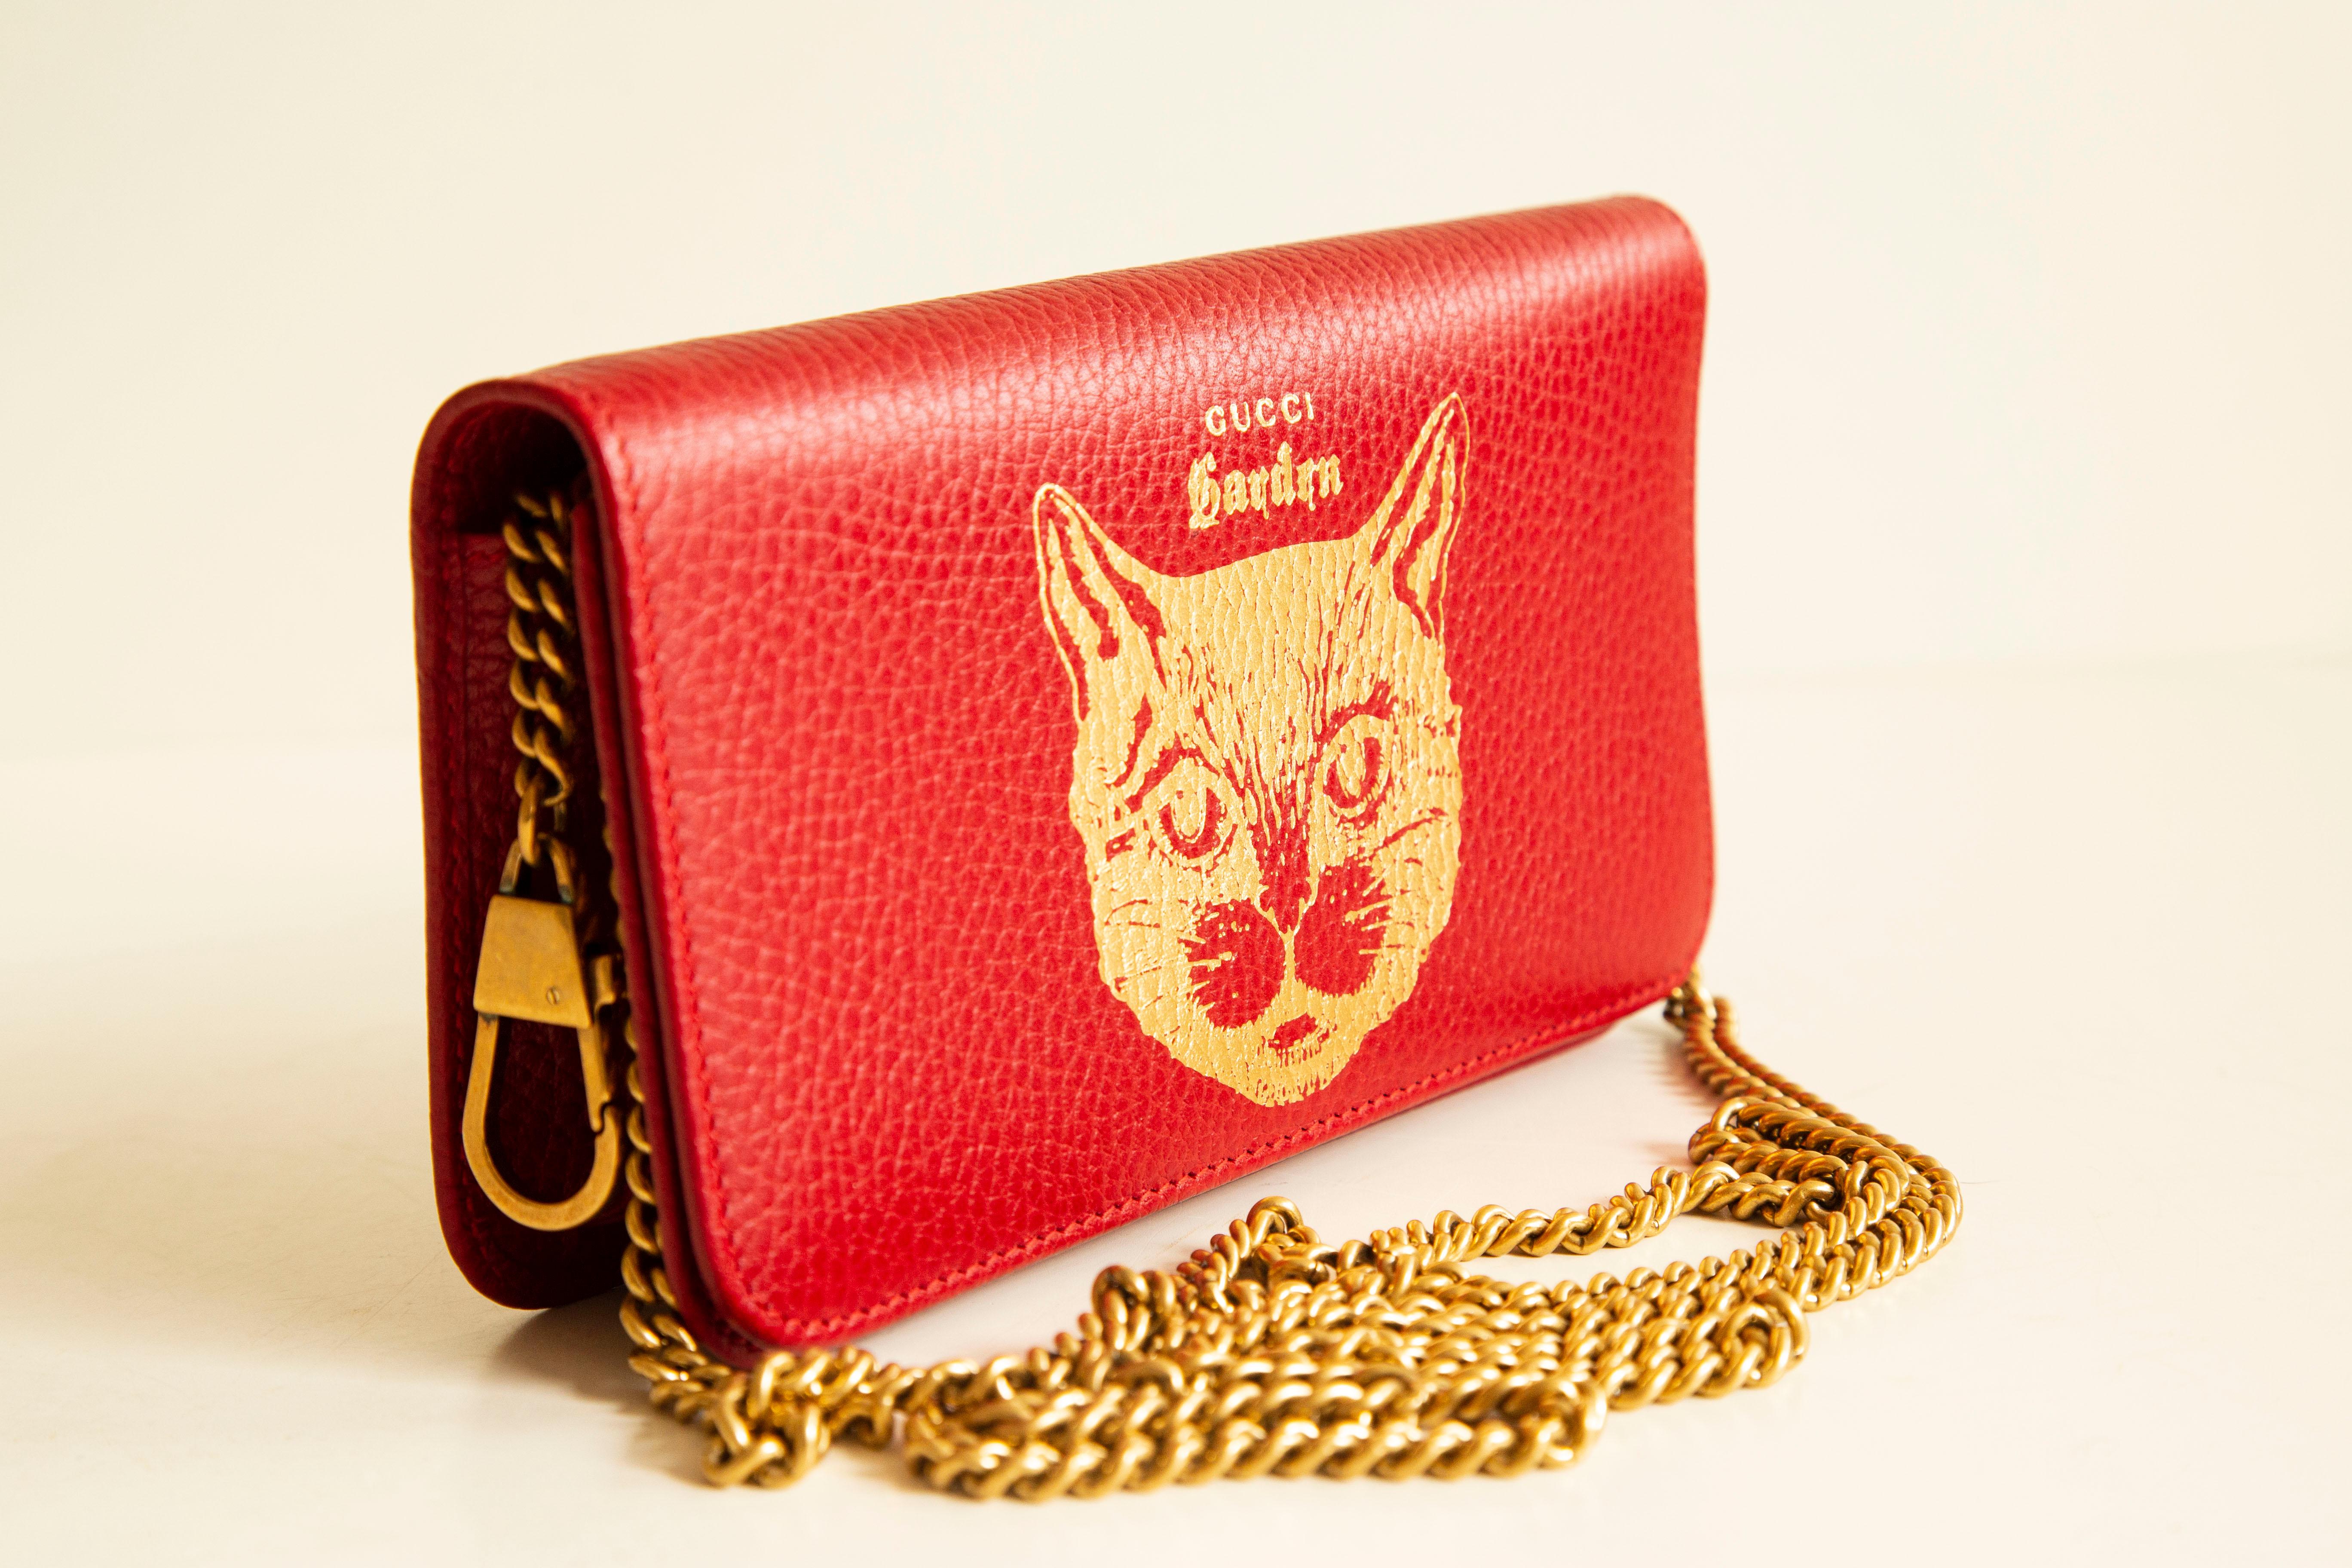 A Gucci limited edition Garden cat chain pouch in red calfskin leather. The bag opens and closes with a magnetic flap and there is one key hanger inside the bag. The interior is lined with blue fabric. The condition is excellent with hardly any